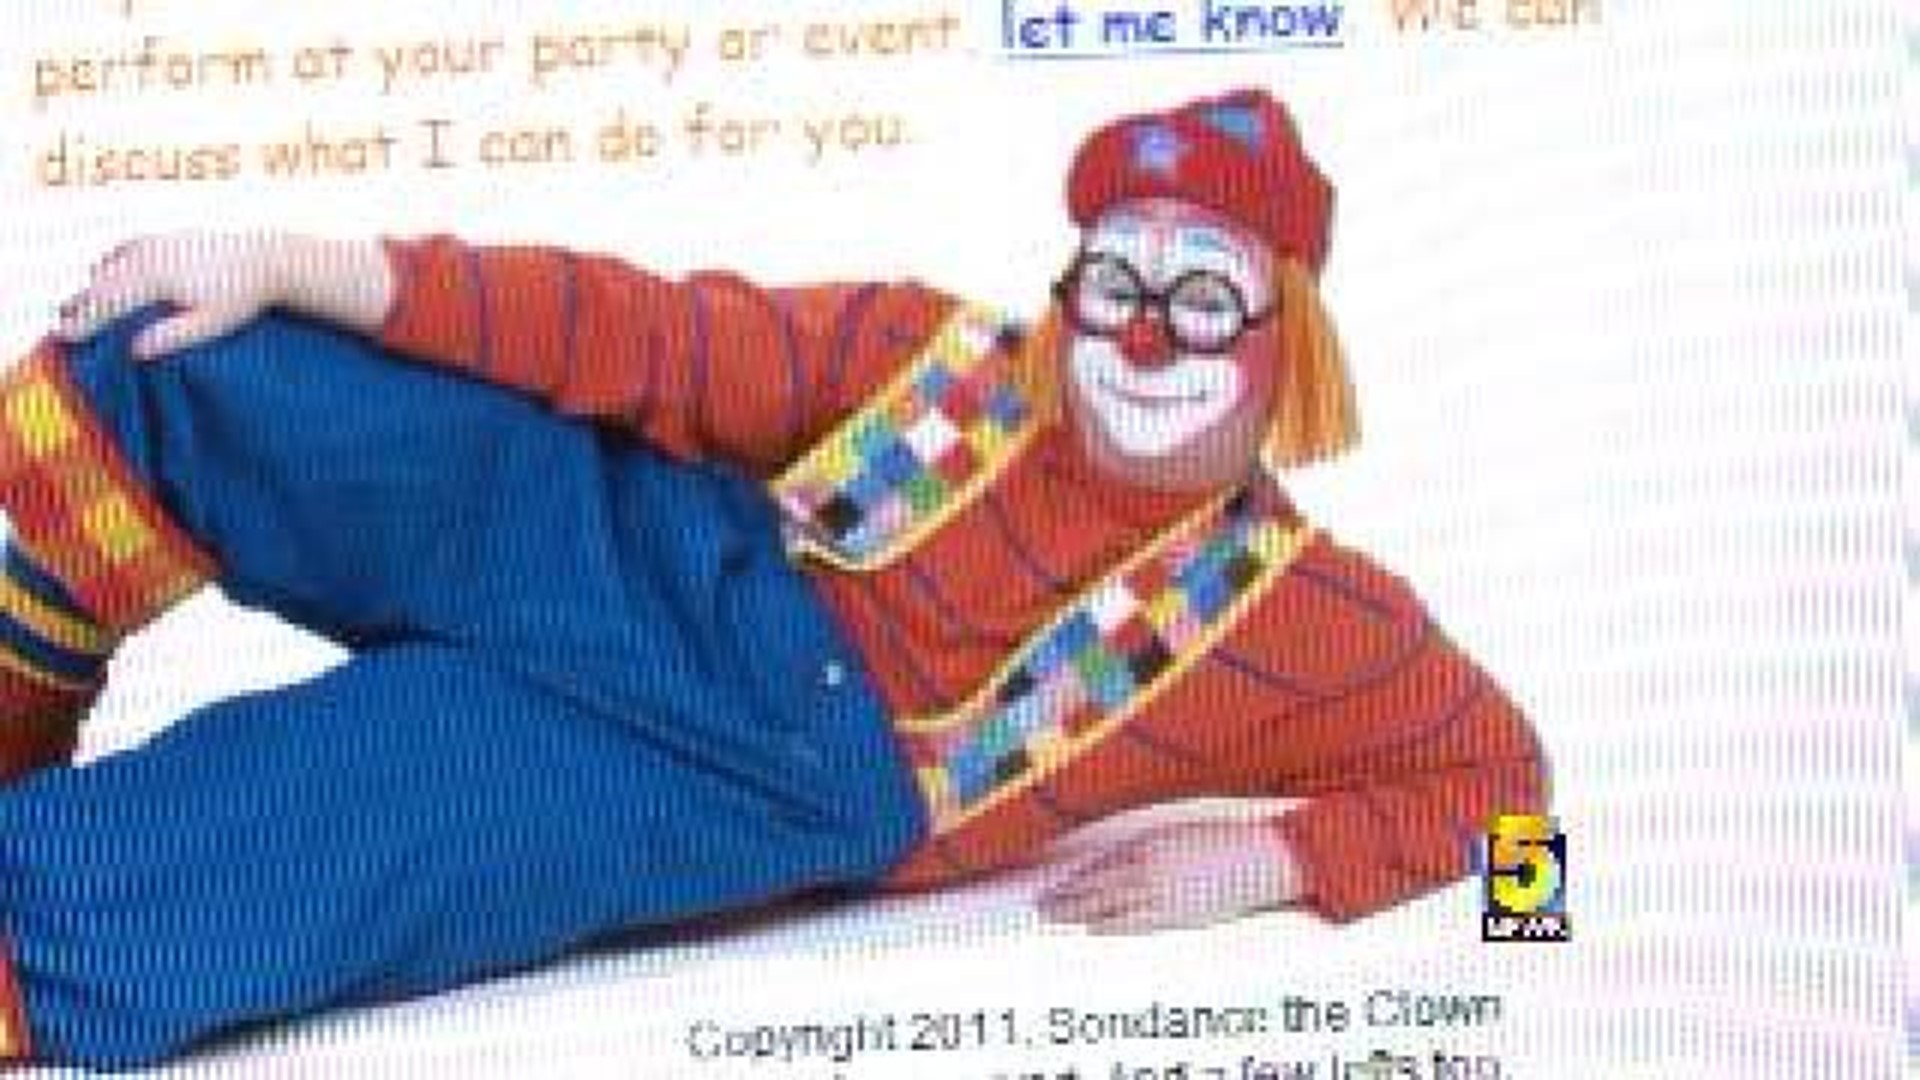 Sondance The Clown Pleads Guilty To Child Porn Charge